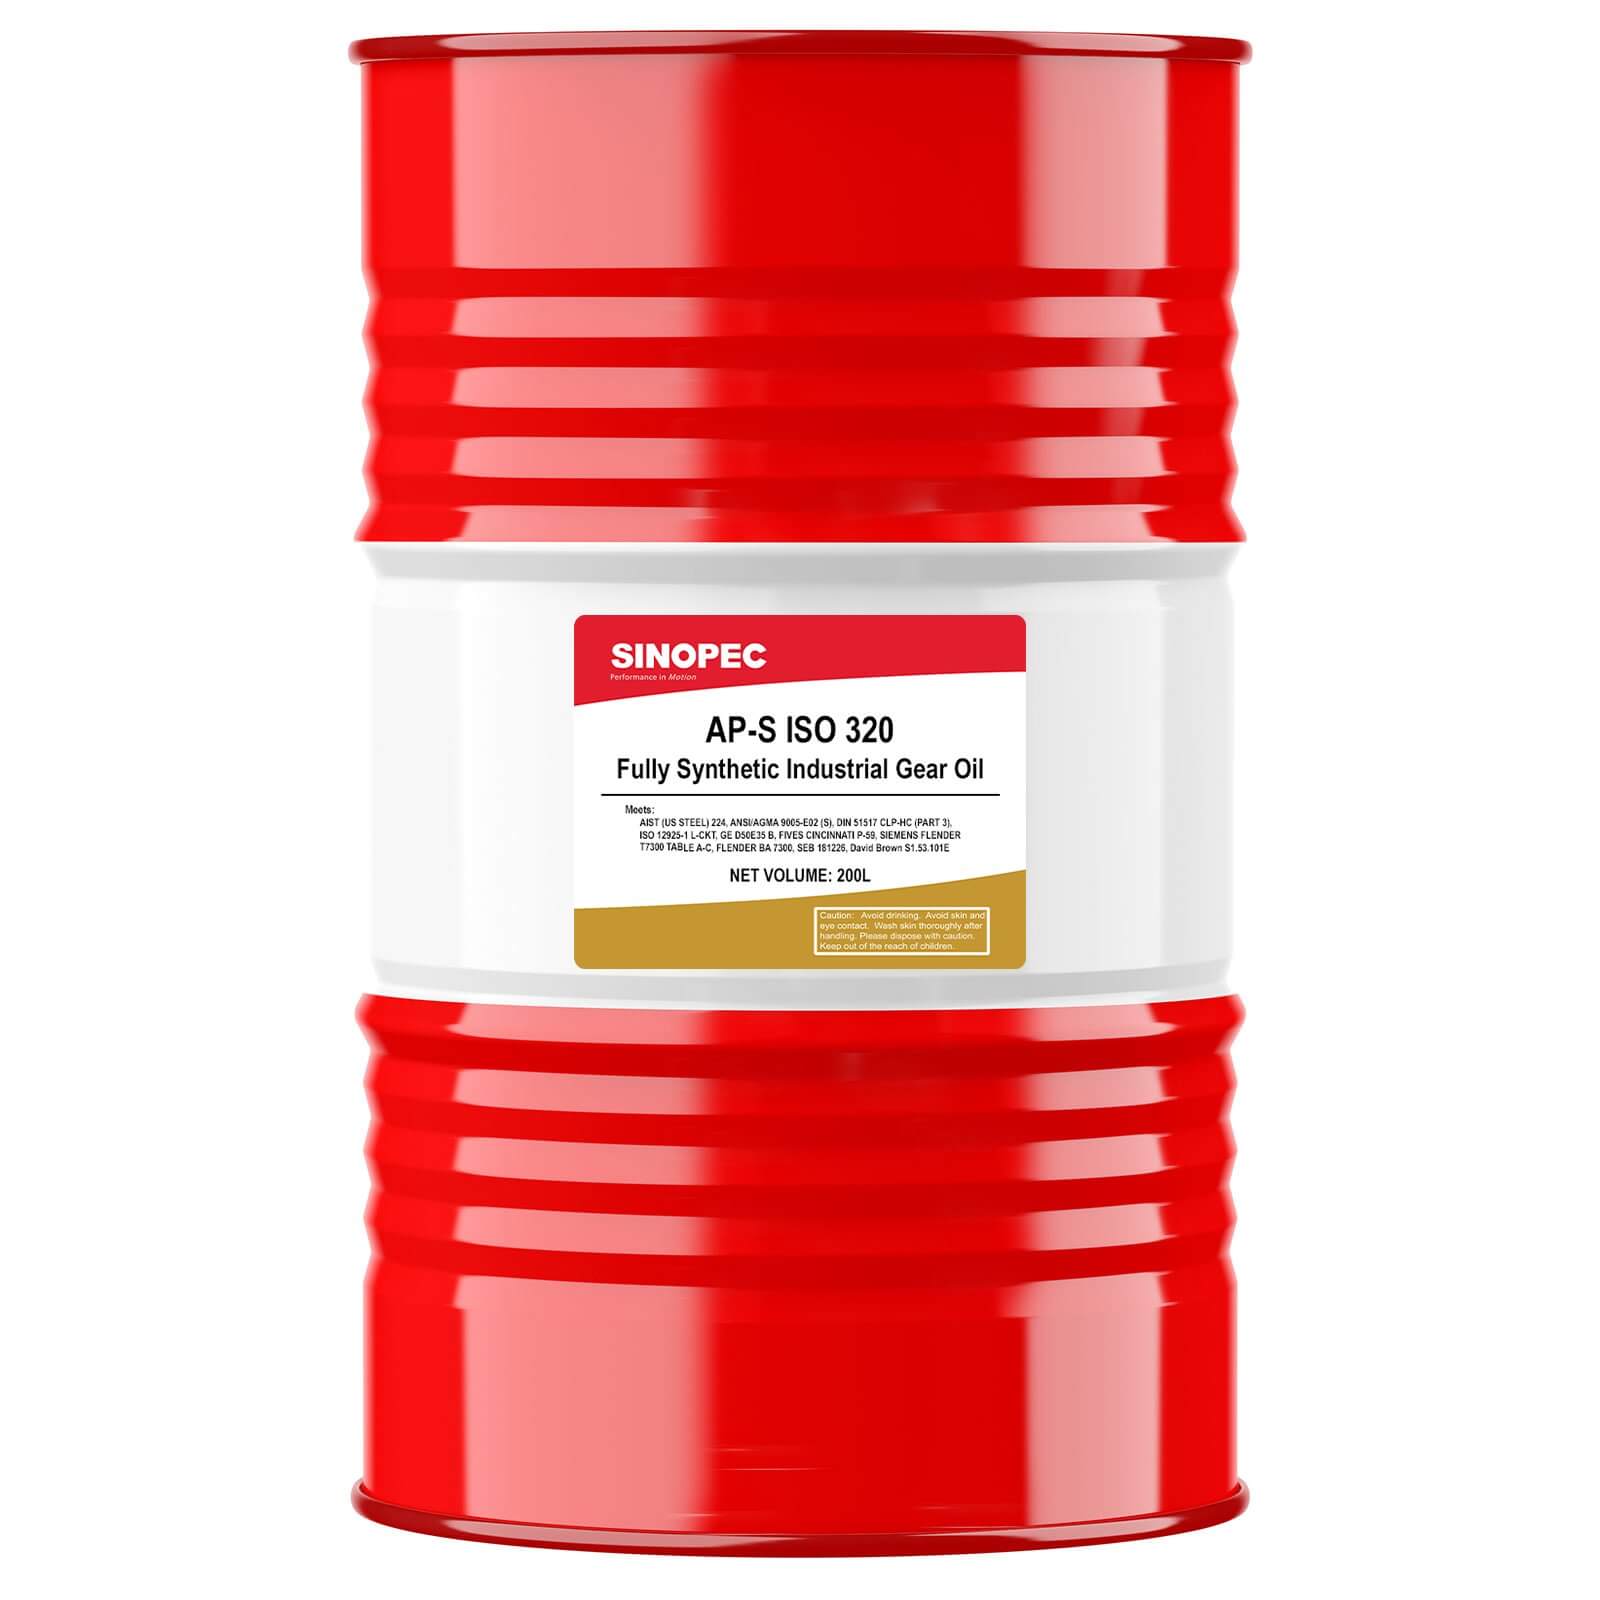 PAO Synthetic Industrial EP Gear Oil - ISO 320-SINOPEC-55 gal,55 Gallon drum,Brand_Sinopec,carter,Category_Industrial Gear Oil,Grade_ISO 320,manufacturing,sinopec,Size_55 Gallon Drum,Type_Synthetic